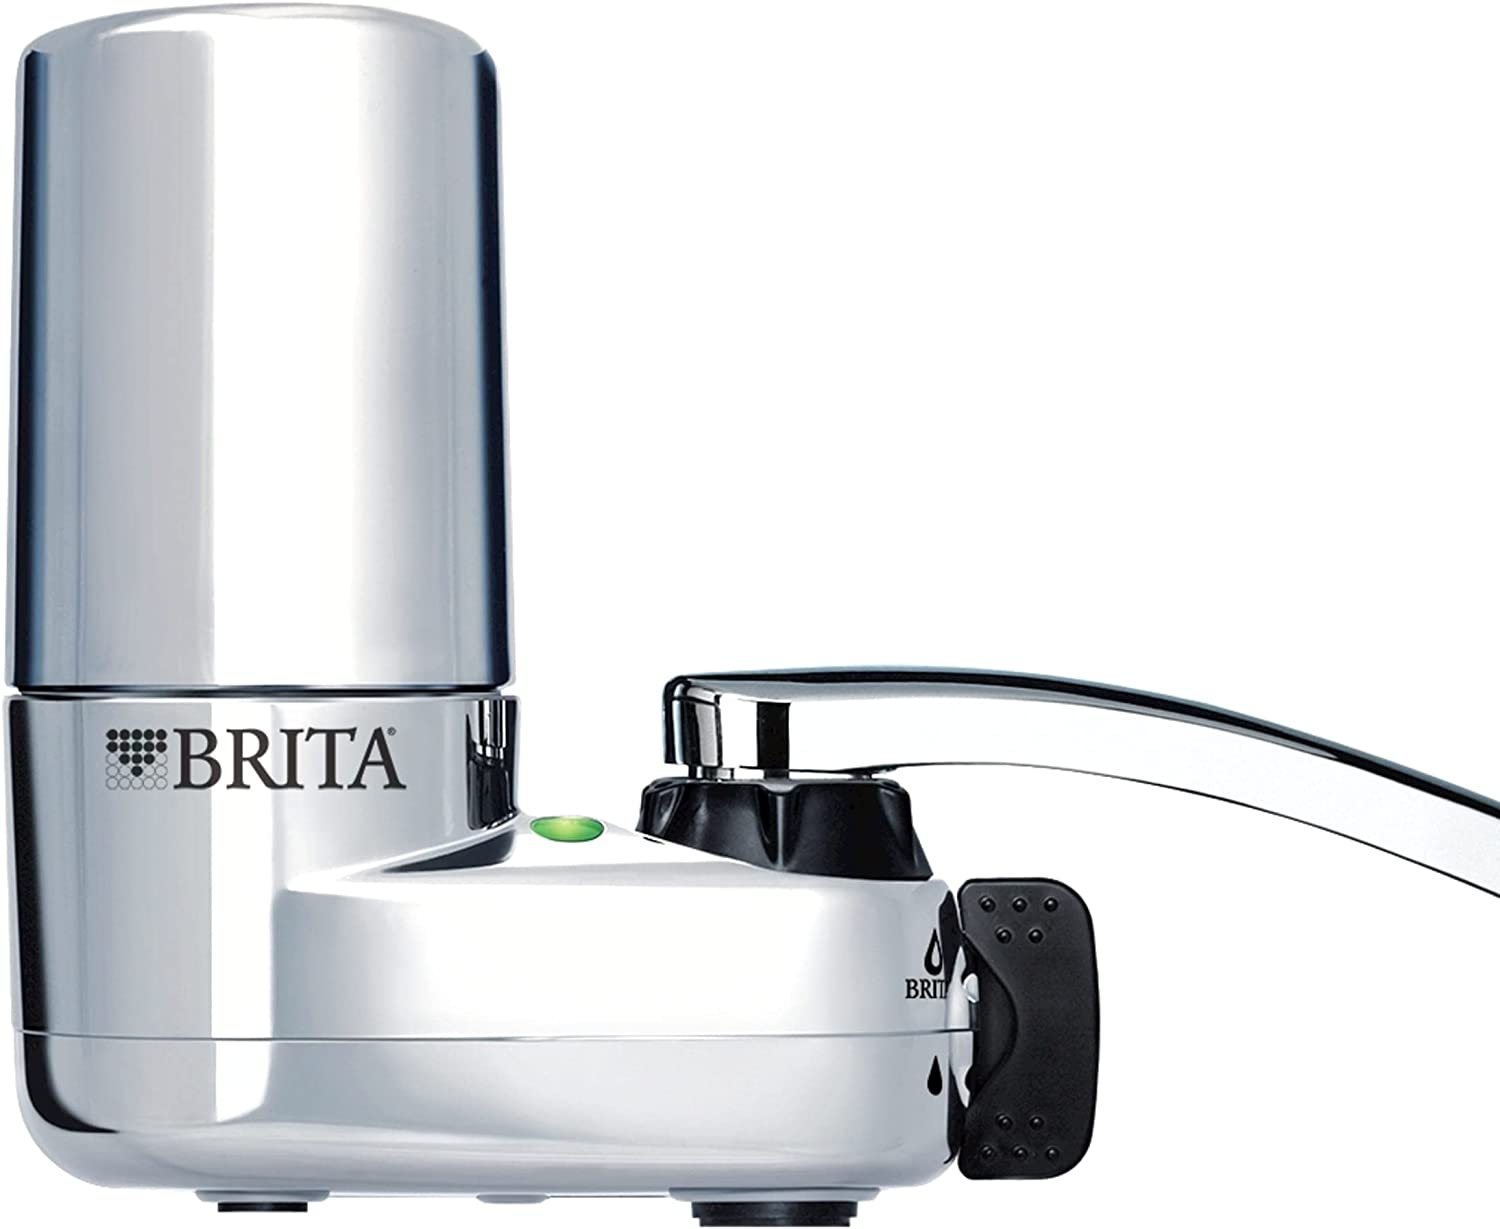 Brita Tap Water Faucet Filtration System with Filter Change Reminder, Reduces 99% of Lead, BPA Free, Fits Standard Faucets Only, Chrome